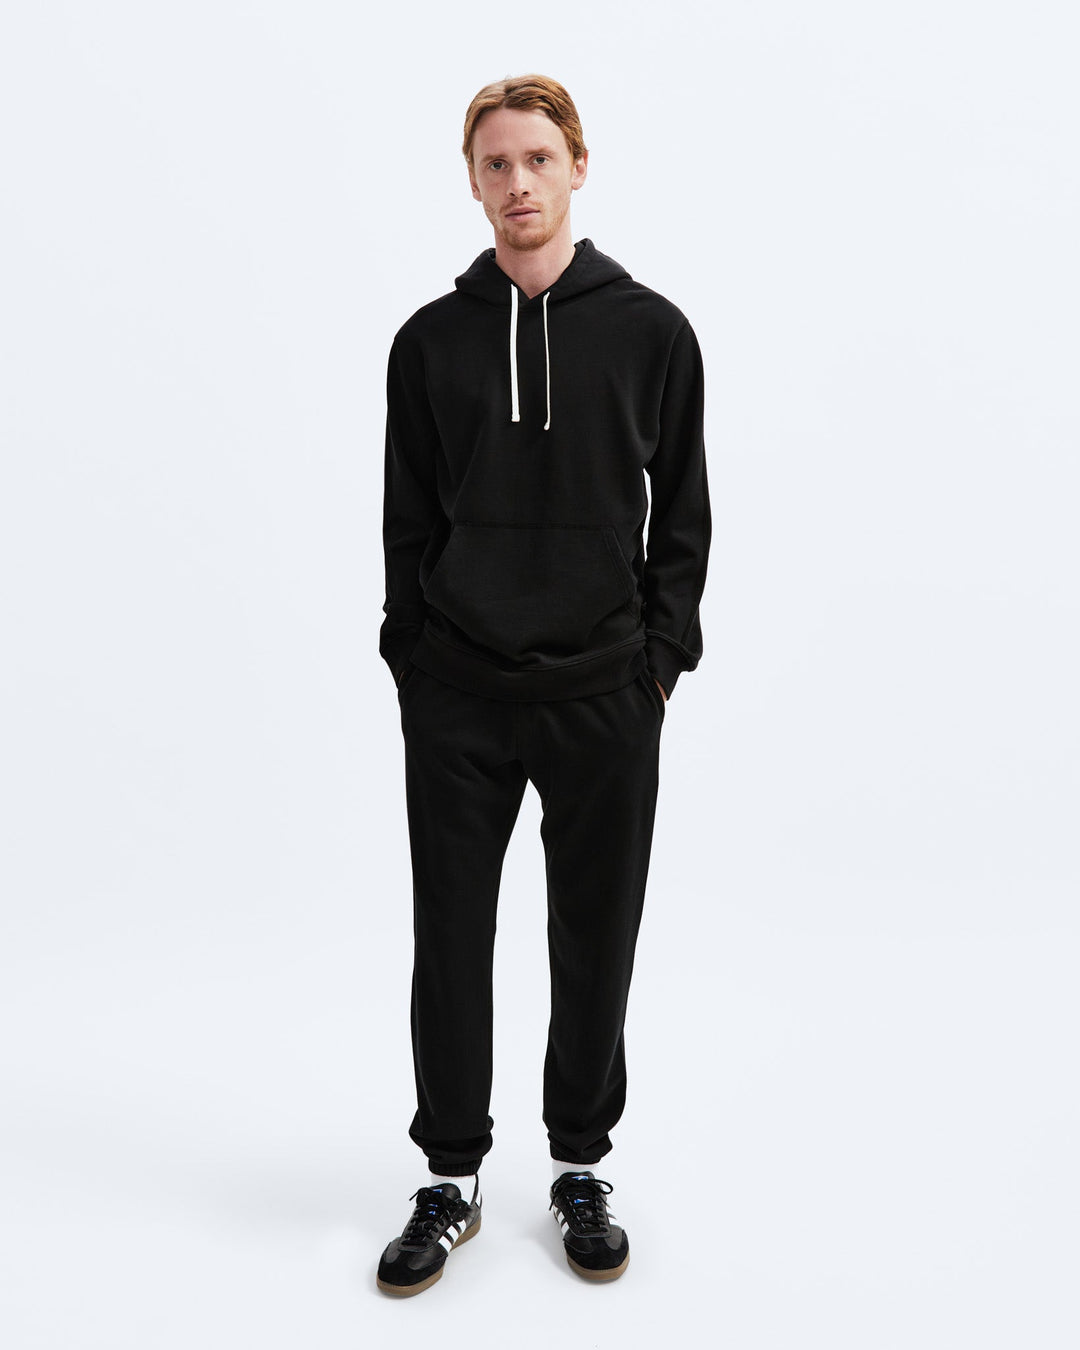 MIDWEIGHT CLASSIC HOODIE (BLACK) - REIGNING CHAMP